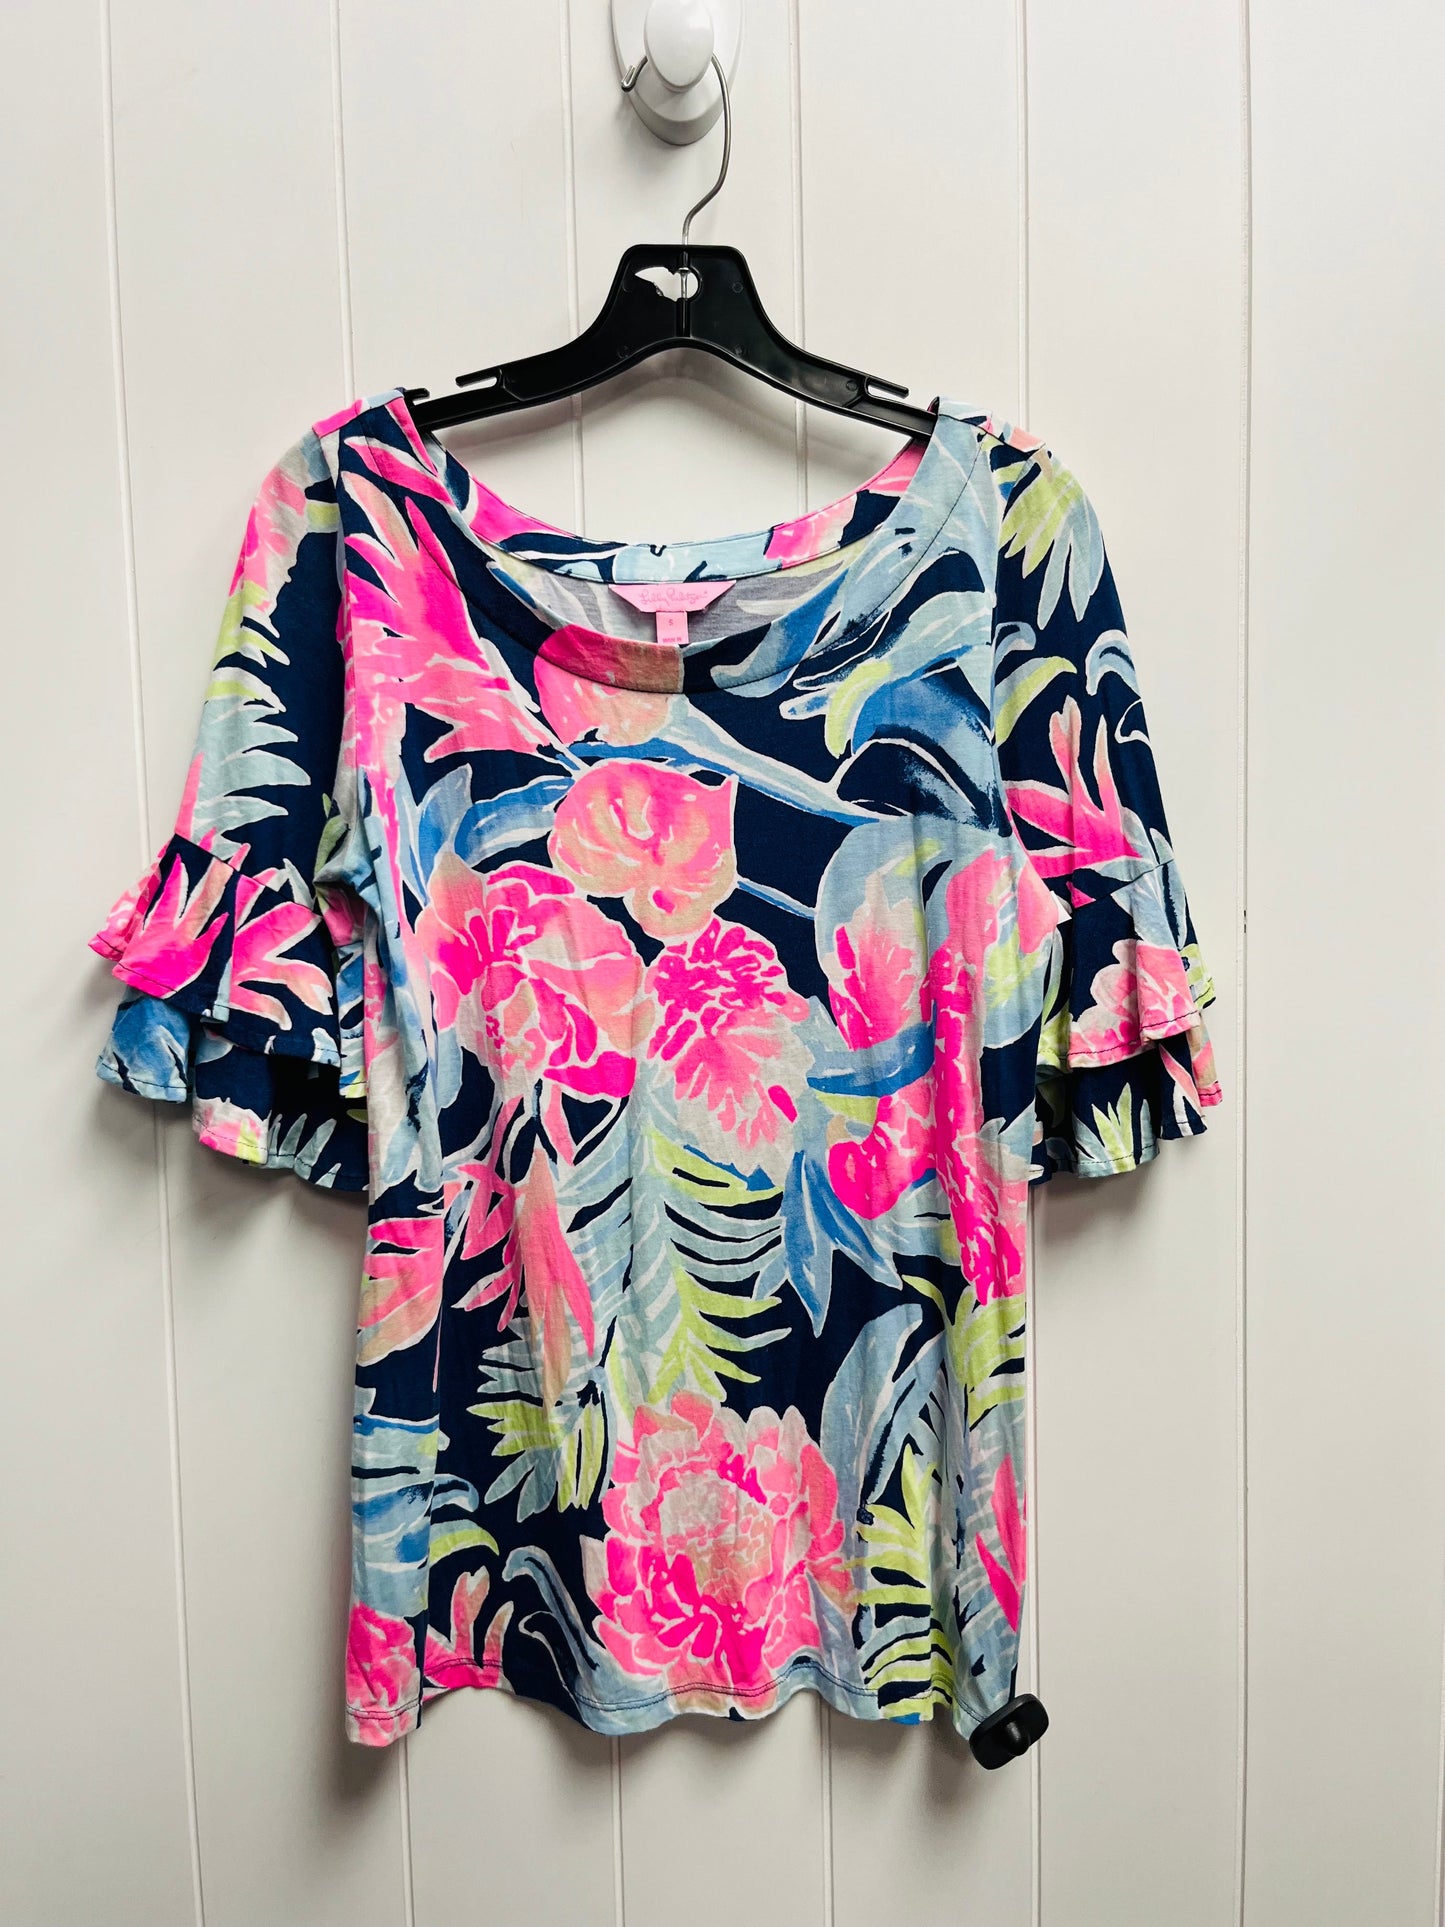 Blue & Pink Top Short Sleeve Lilly Pulitzer, Size S